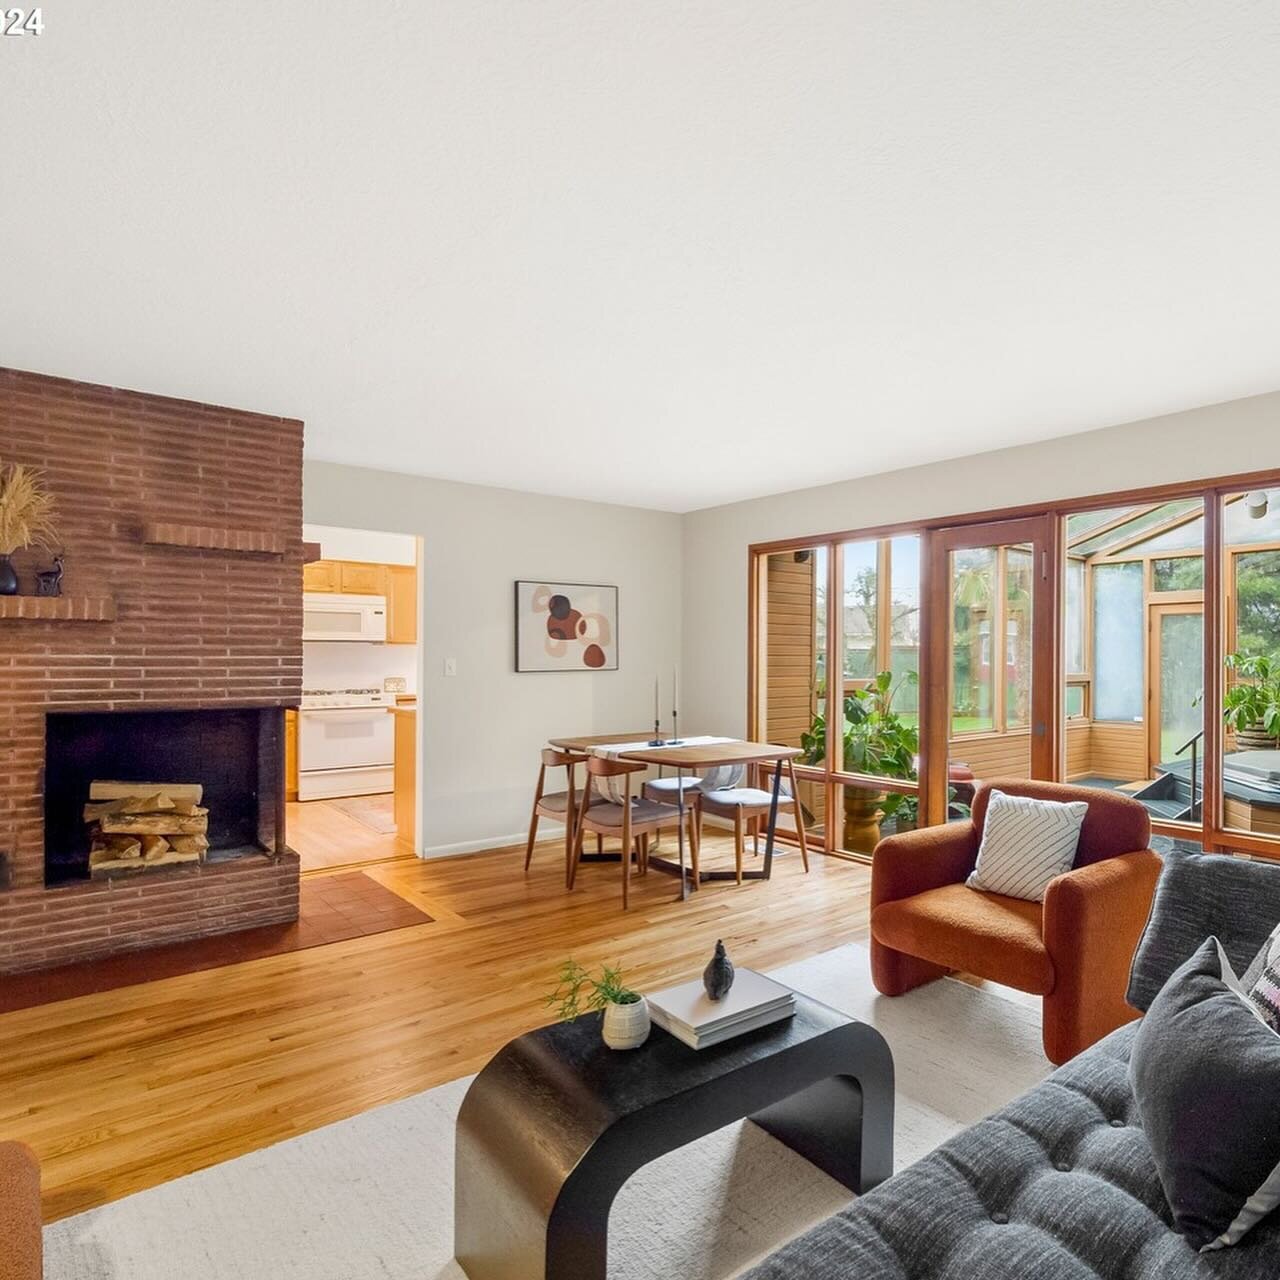 Great house alert with even greater potential (keep reading to hear about my ideas!). This East Portland 3BR ranch is full of Mid-Century character - and it&rsquo;s under $500K to boot. With unique features like the stunning sun room fit with a built